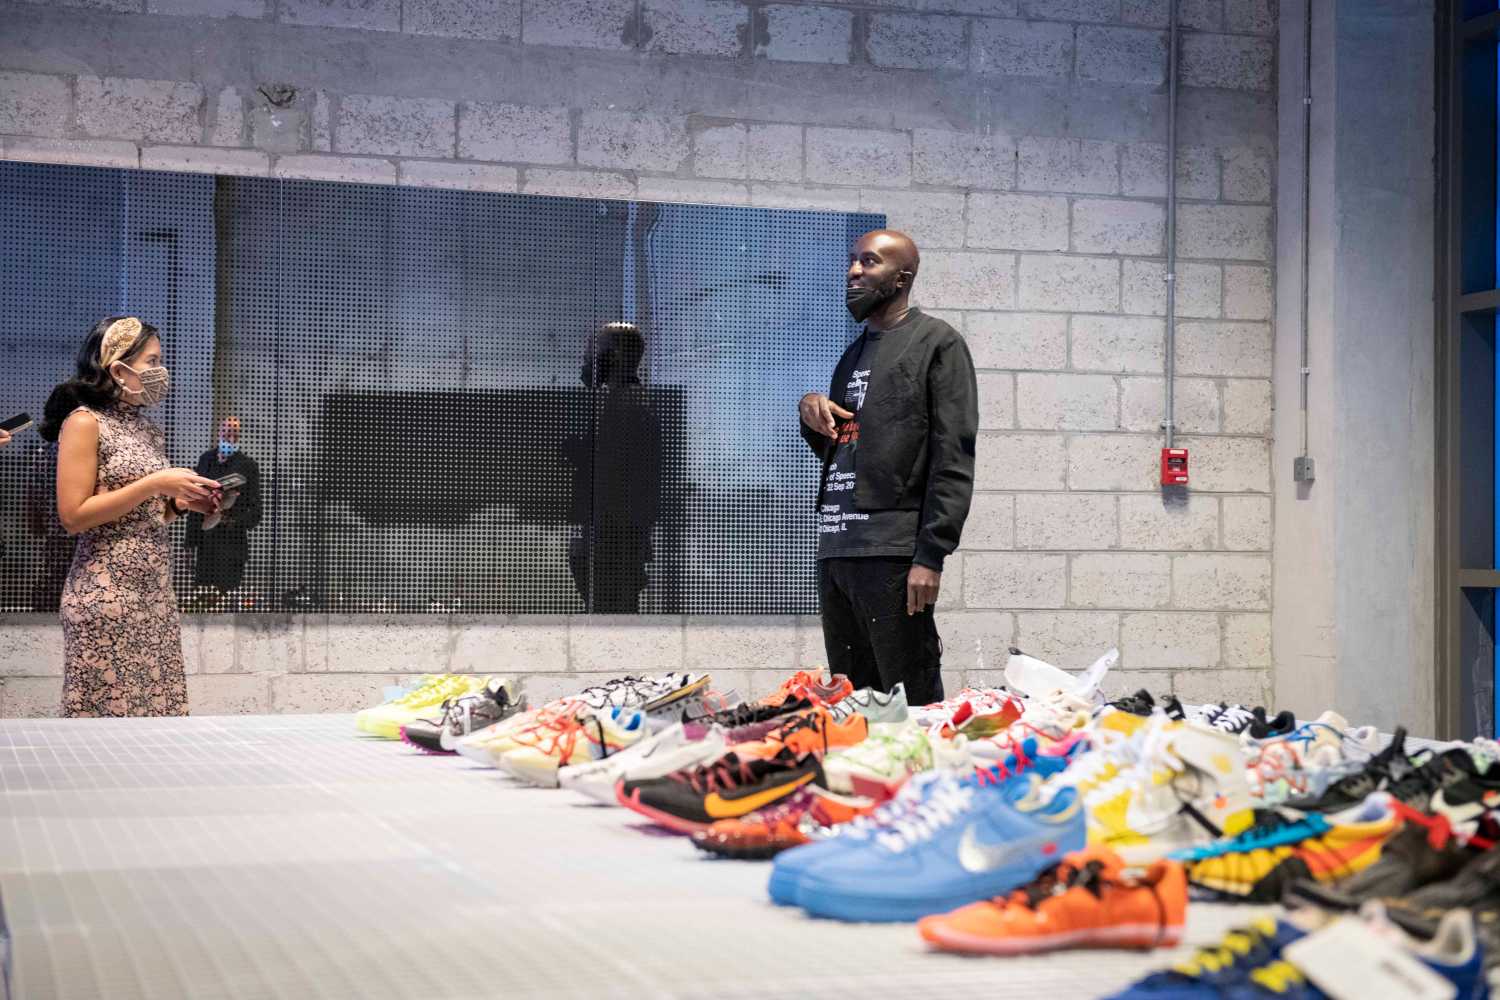 Boston's ICA Features Virgil Abloh's Newest Multimedia Exhibition